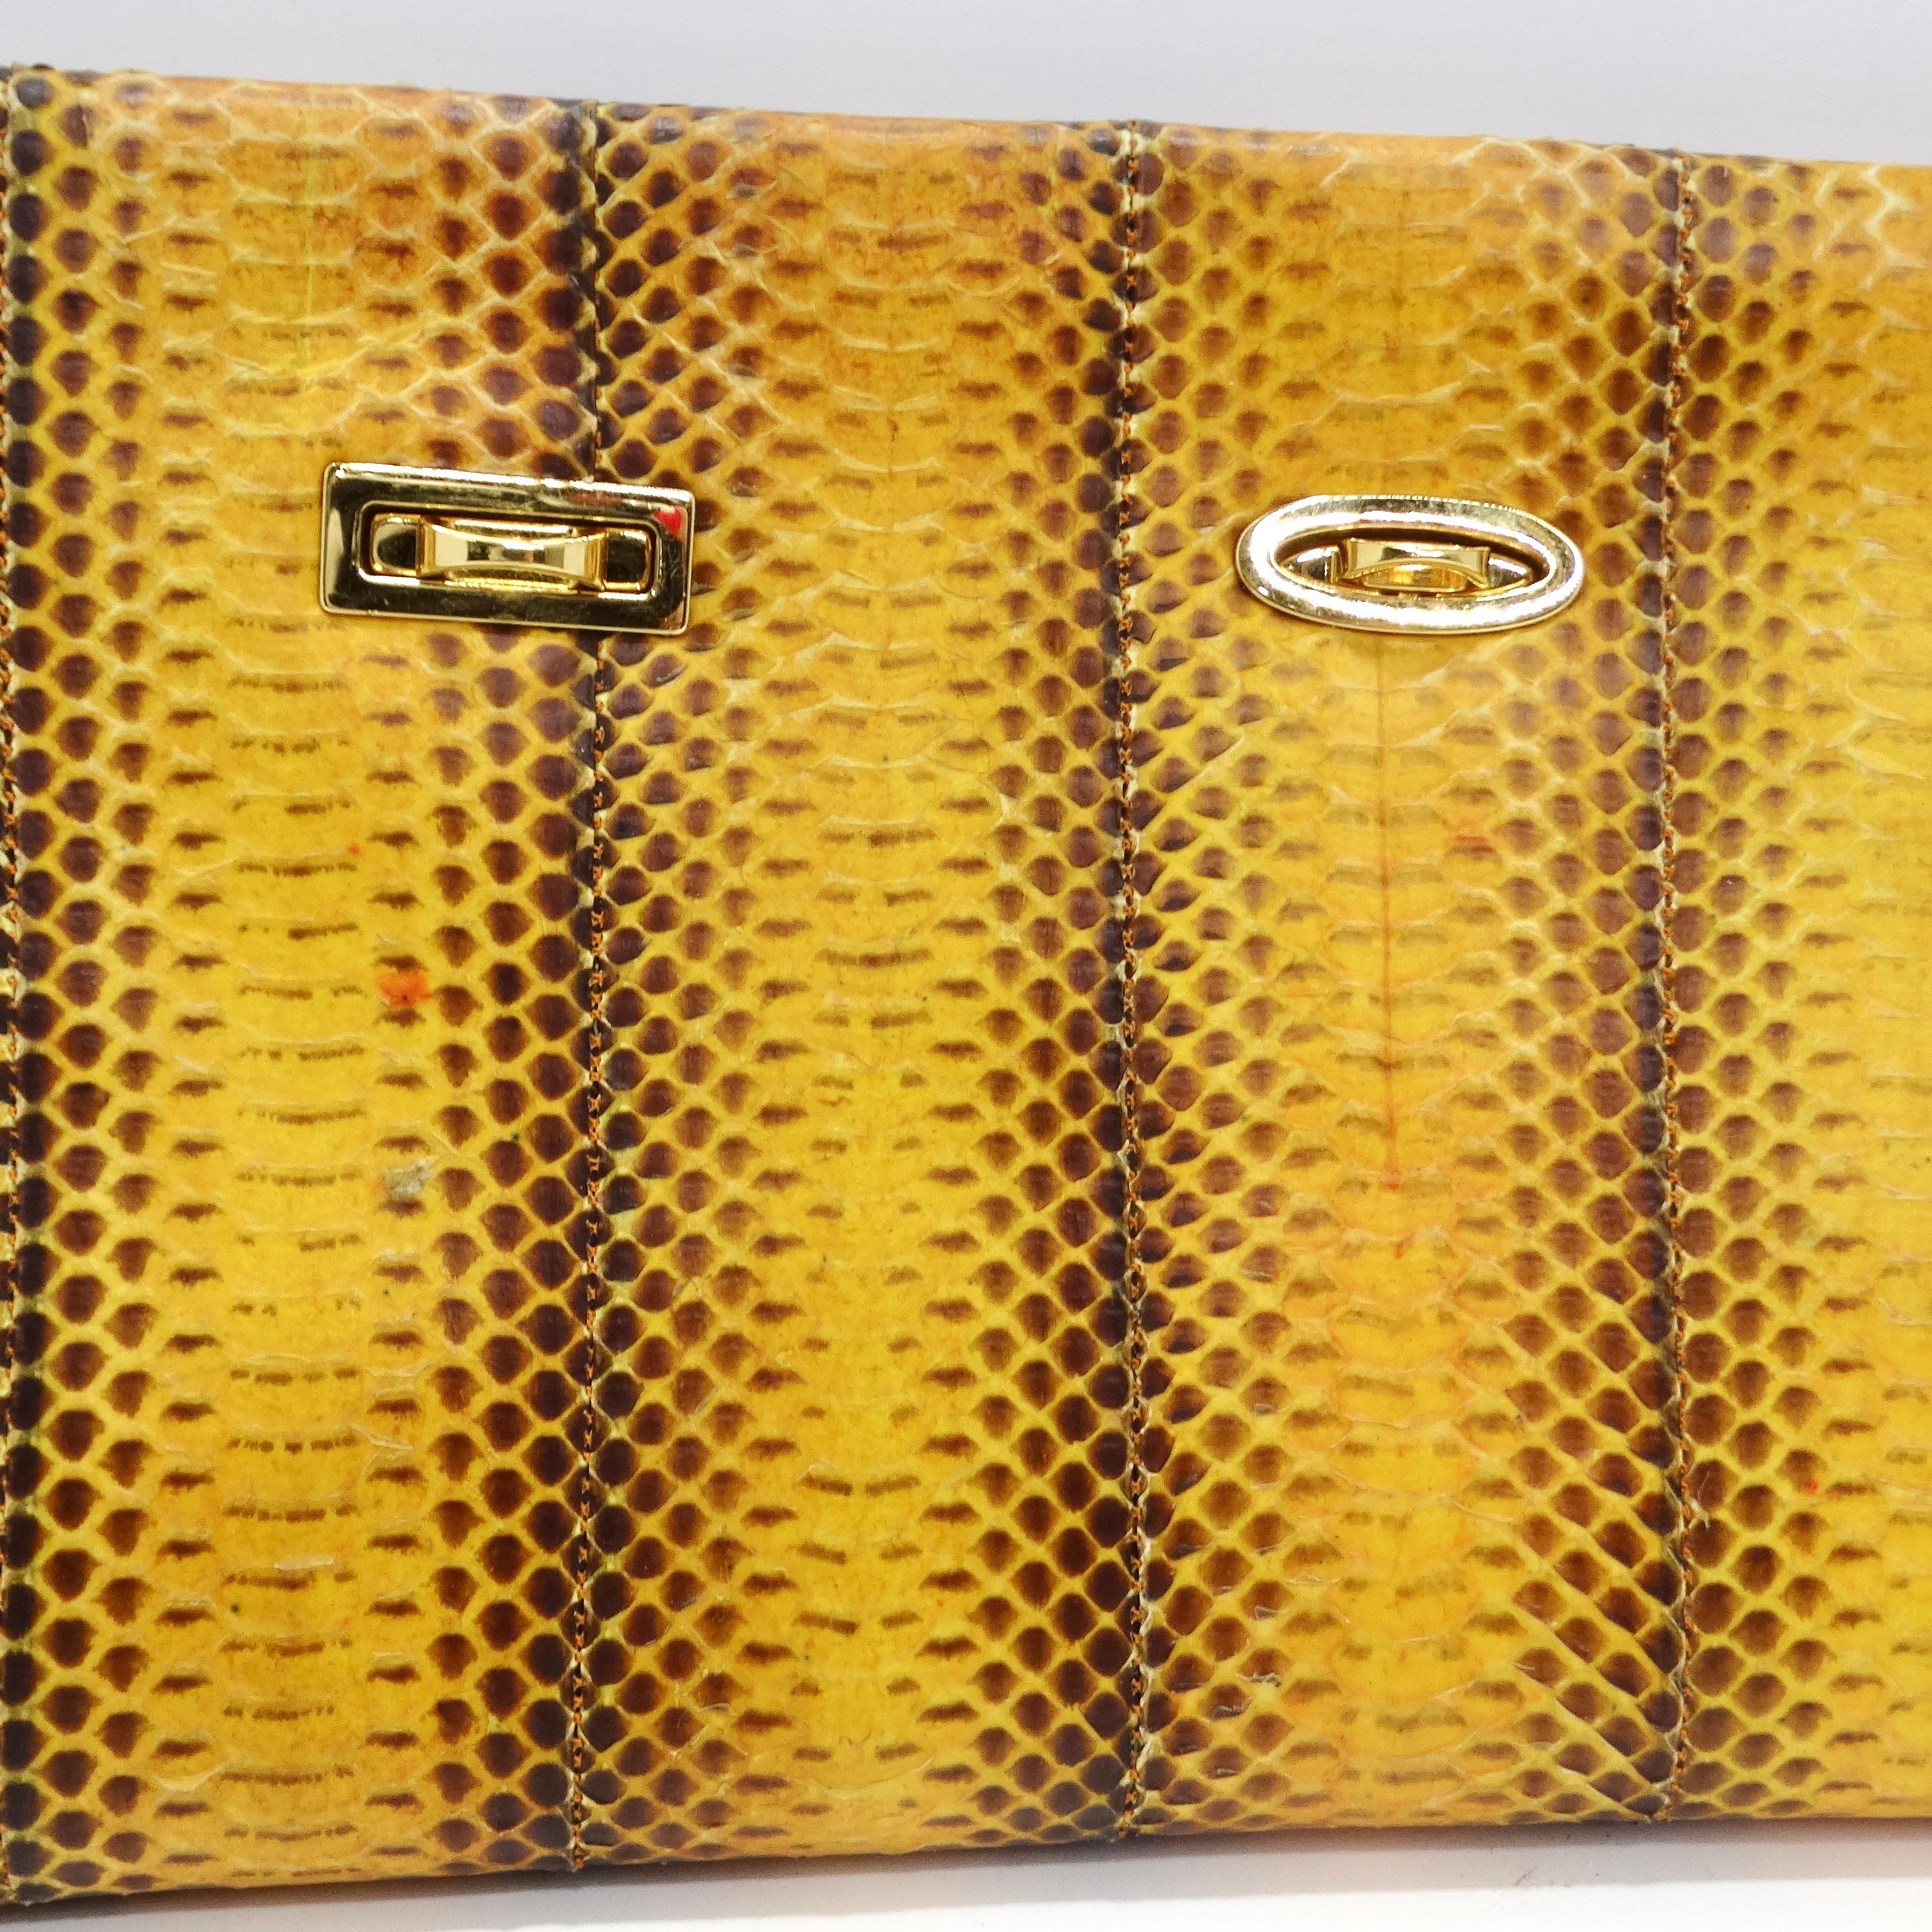 Introducing the stunning VBH 1980s Yellow Snakeskin Embossed Leather Clutch, a truly special and eye-catching accessory that epitomizes the bold and vibrant style of the 1980s. Handmade and limited edition, this clutch is a unique piece that is sure